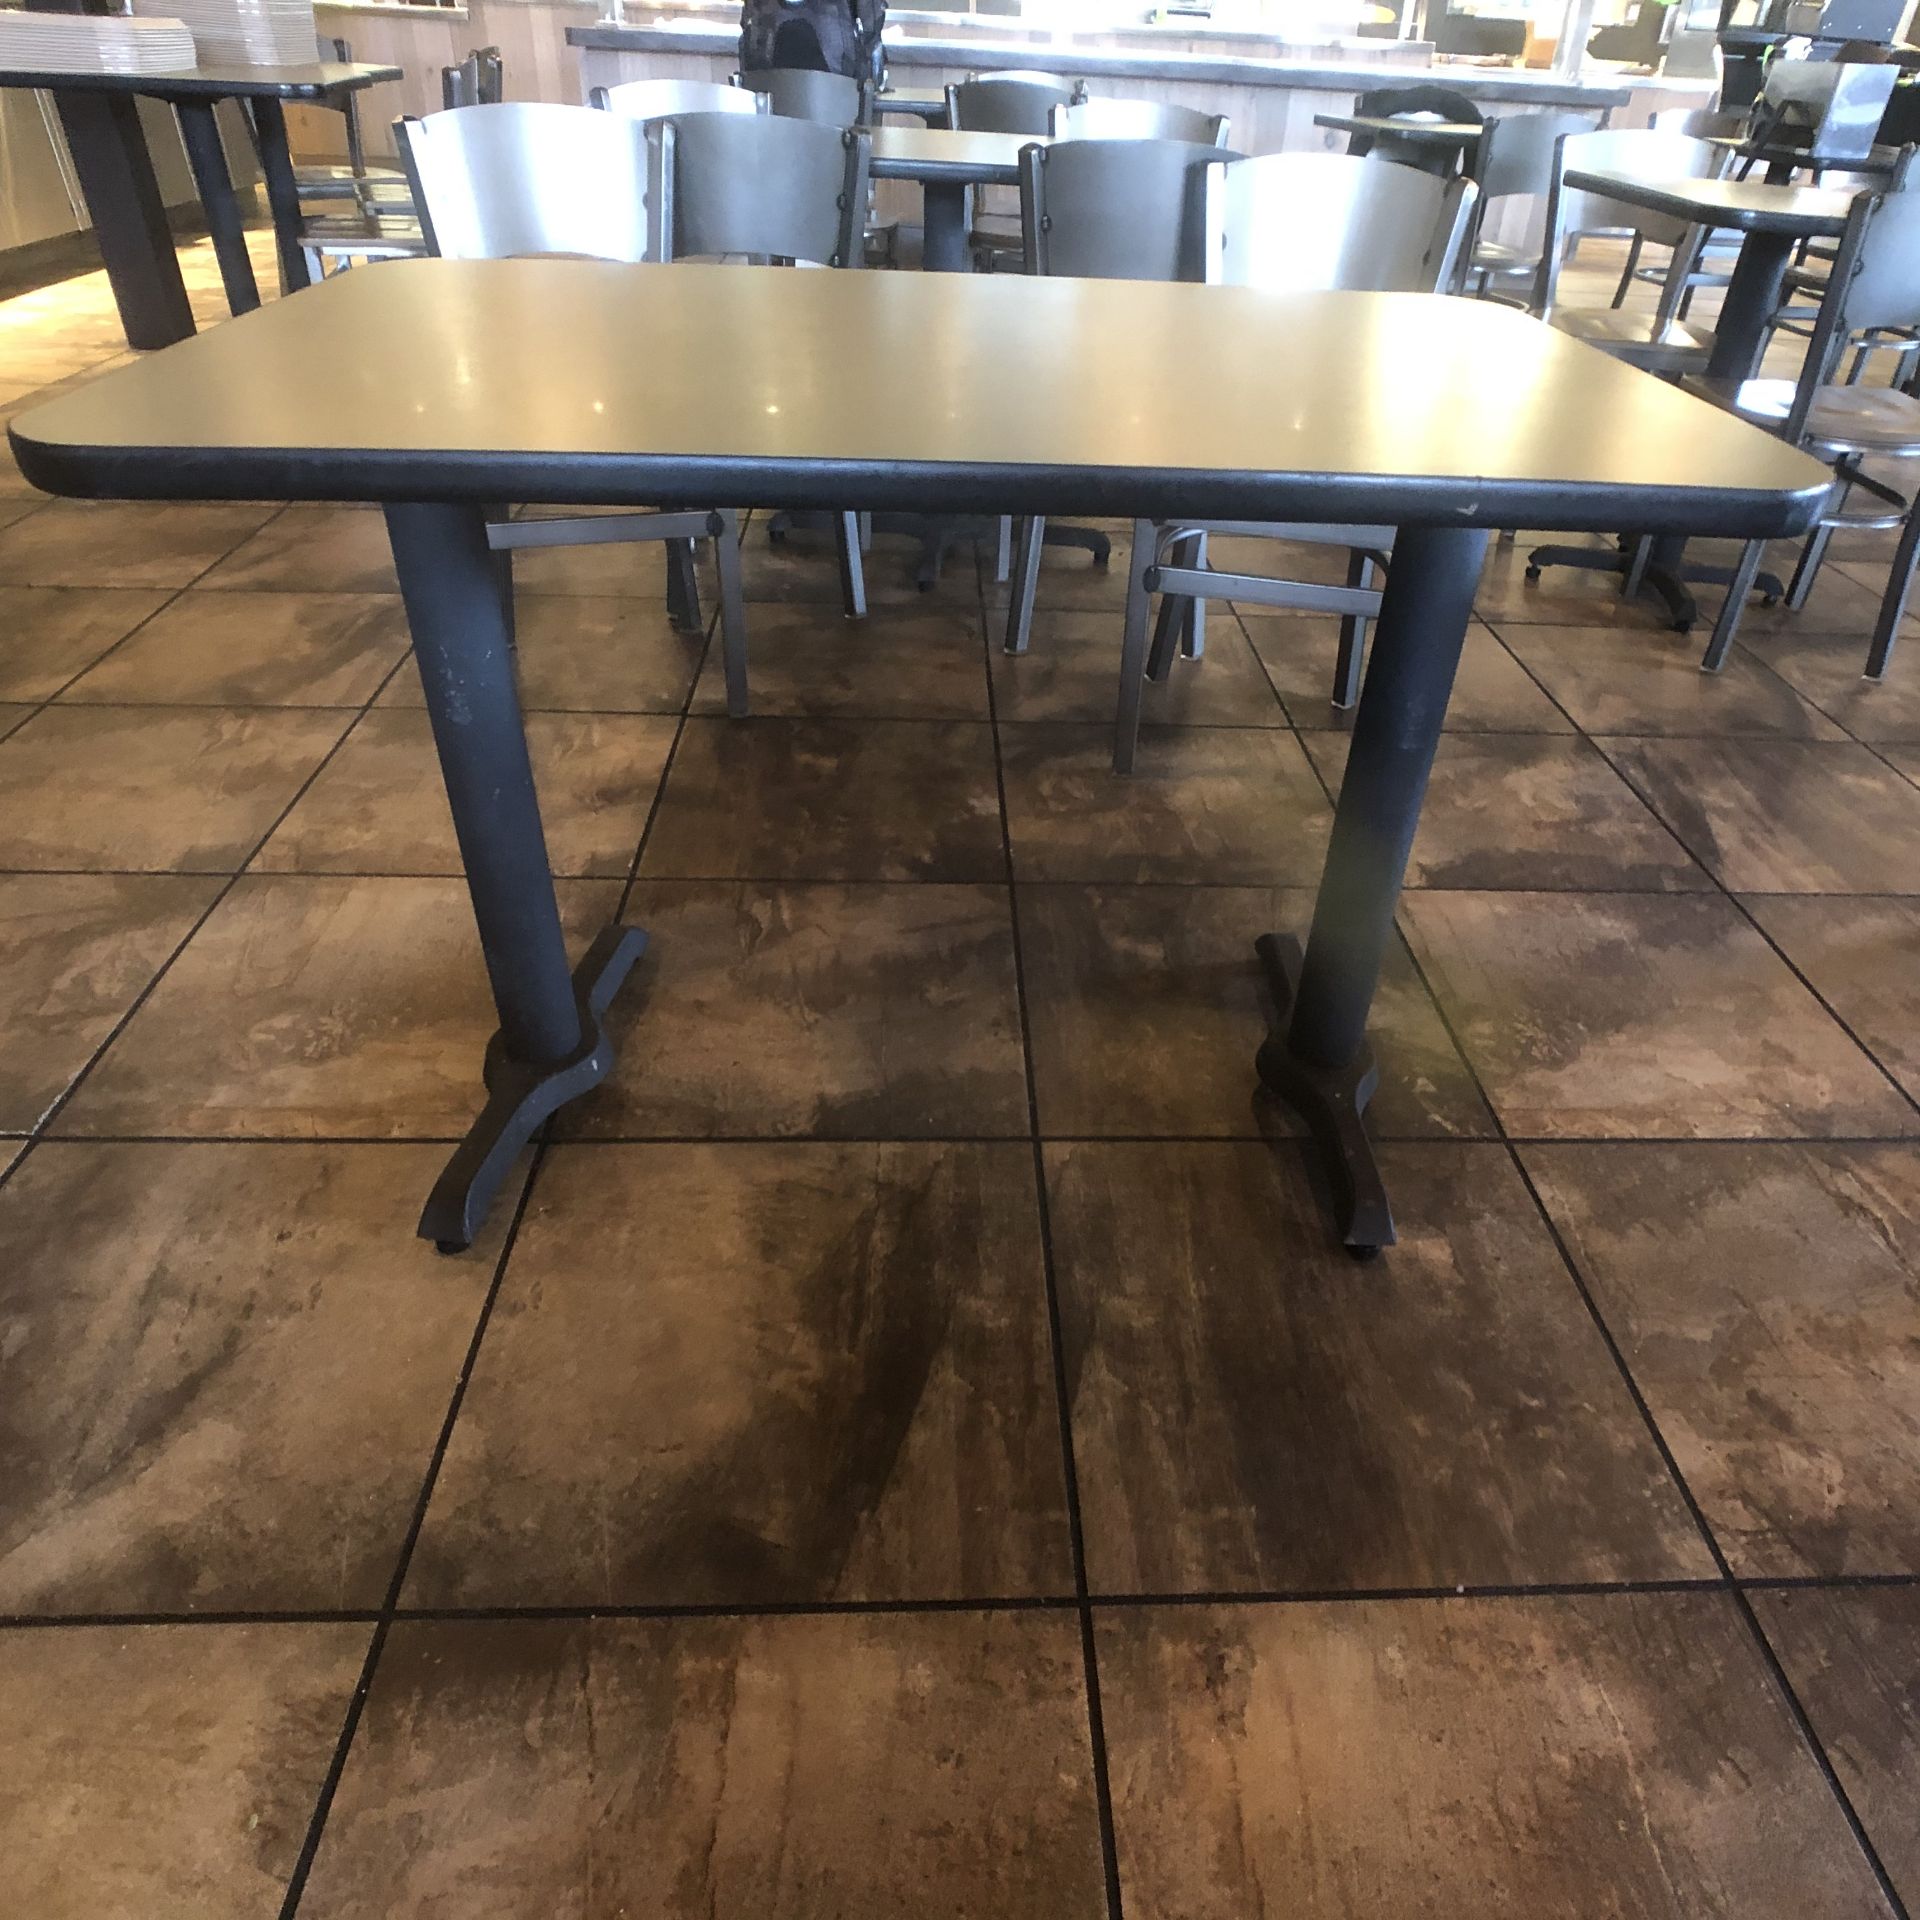 (6) 4-Person Tables with (24) Walsh Simmons Seating Chairs, Approx. 44" L x 28" W - Image 3 of 5